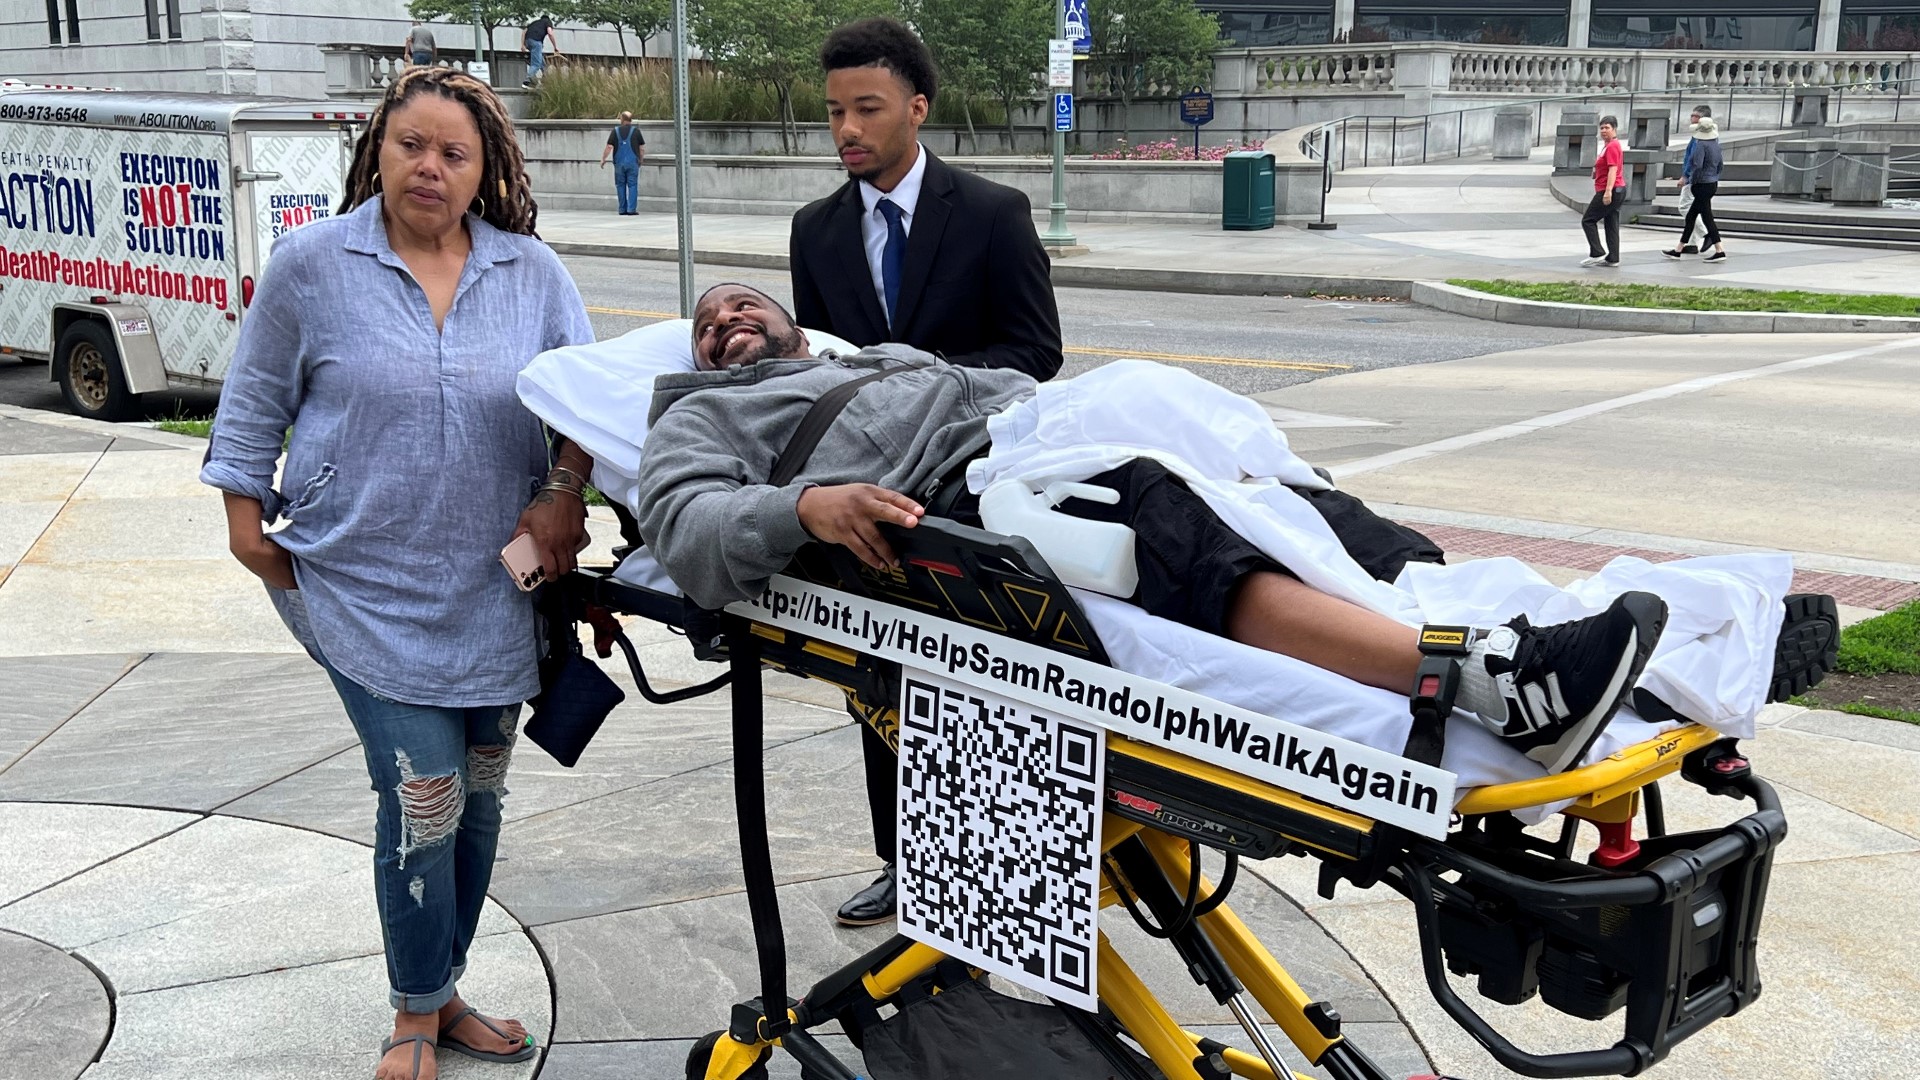 A Harrisburg man was released from prison last year after serving more than two decades of a death sentence. He says an attack by prison guards left him paralyzed.